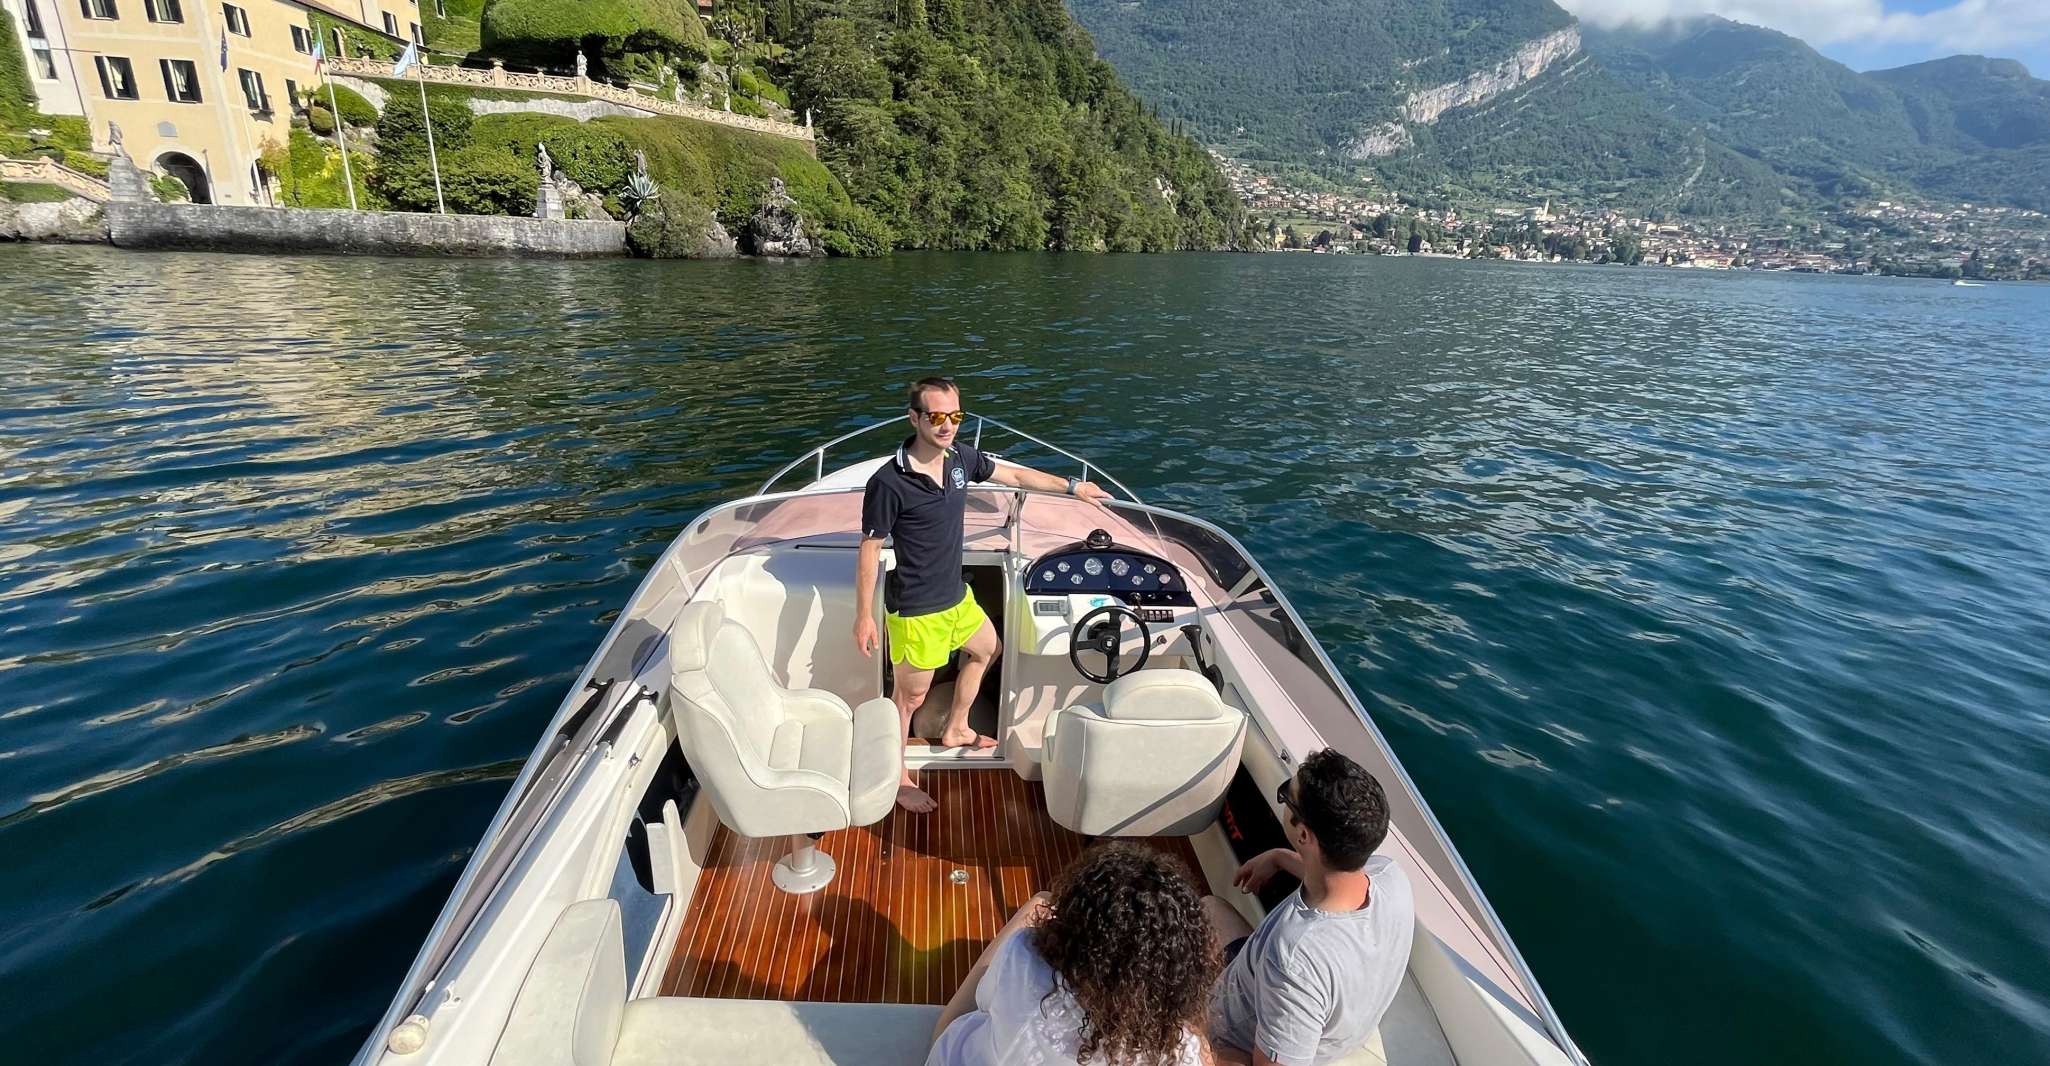 Private Luxury Boat Tour of Lake Como with Stops & Drinks - Housity